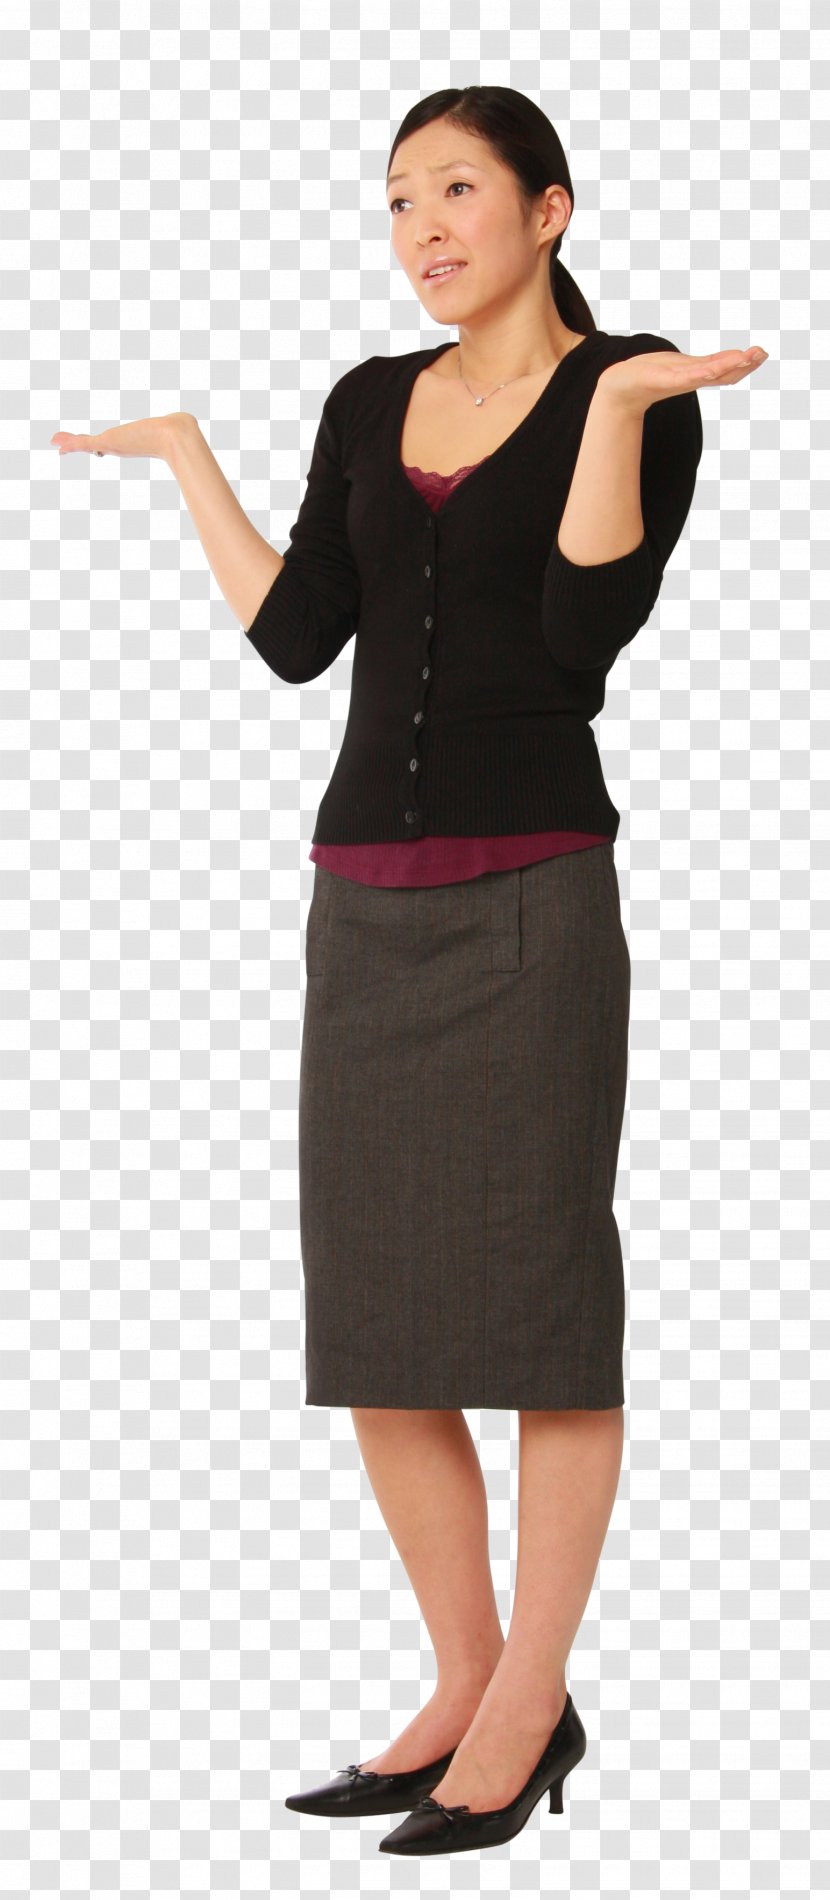 Woman Businessperson Dress Pencil Skirt - Silhouette - Confused Transparent PNG